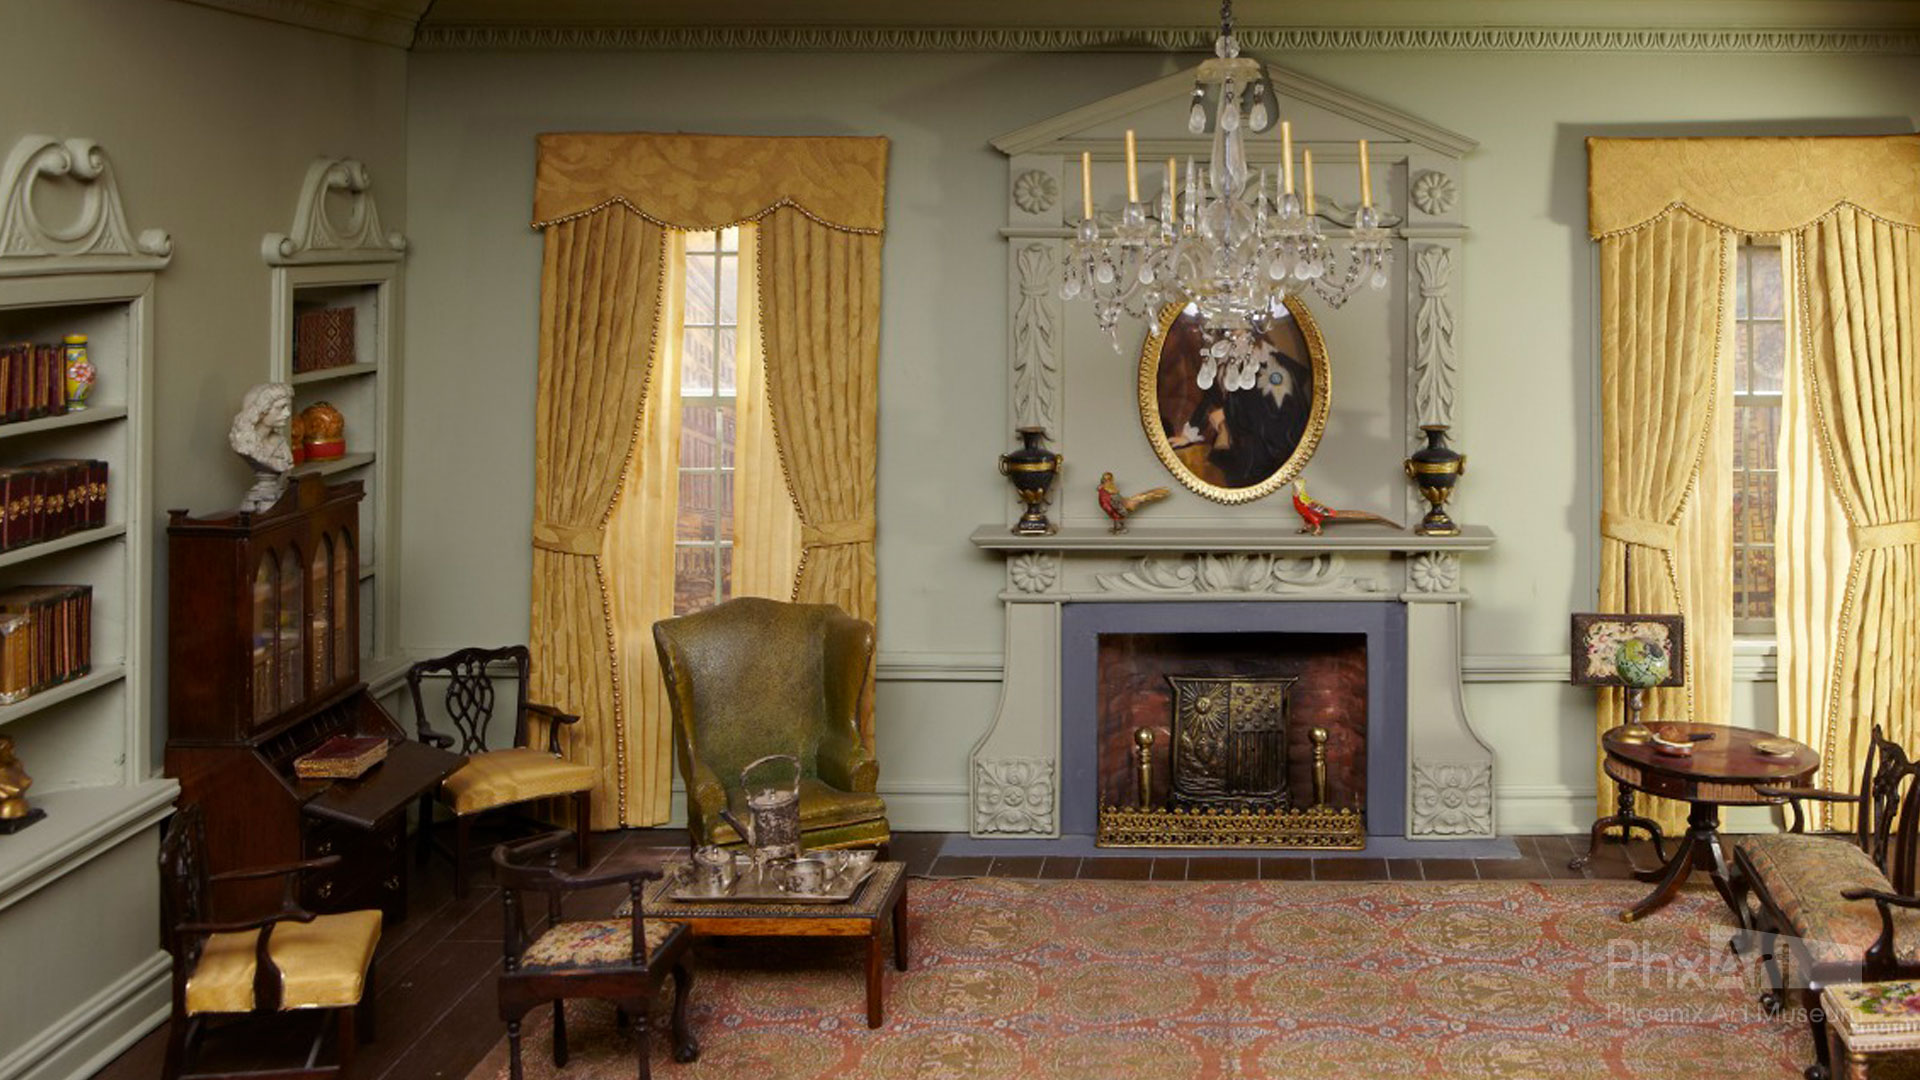 Narcissa Niblack Thorne, American Drawing Room, c. 1925, 20th century. Mixed media. Gift of Mrs. Judith Thorne Stanton.